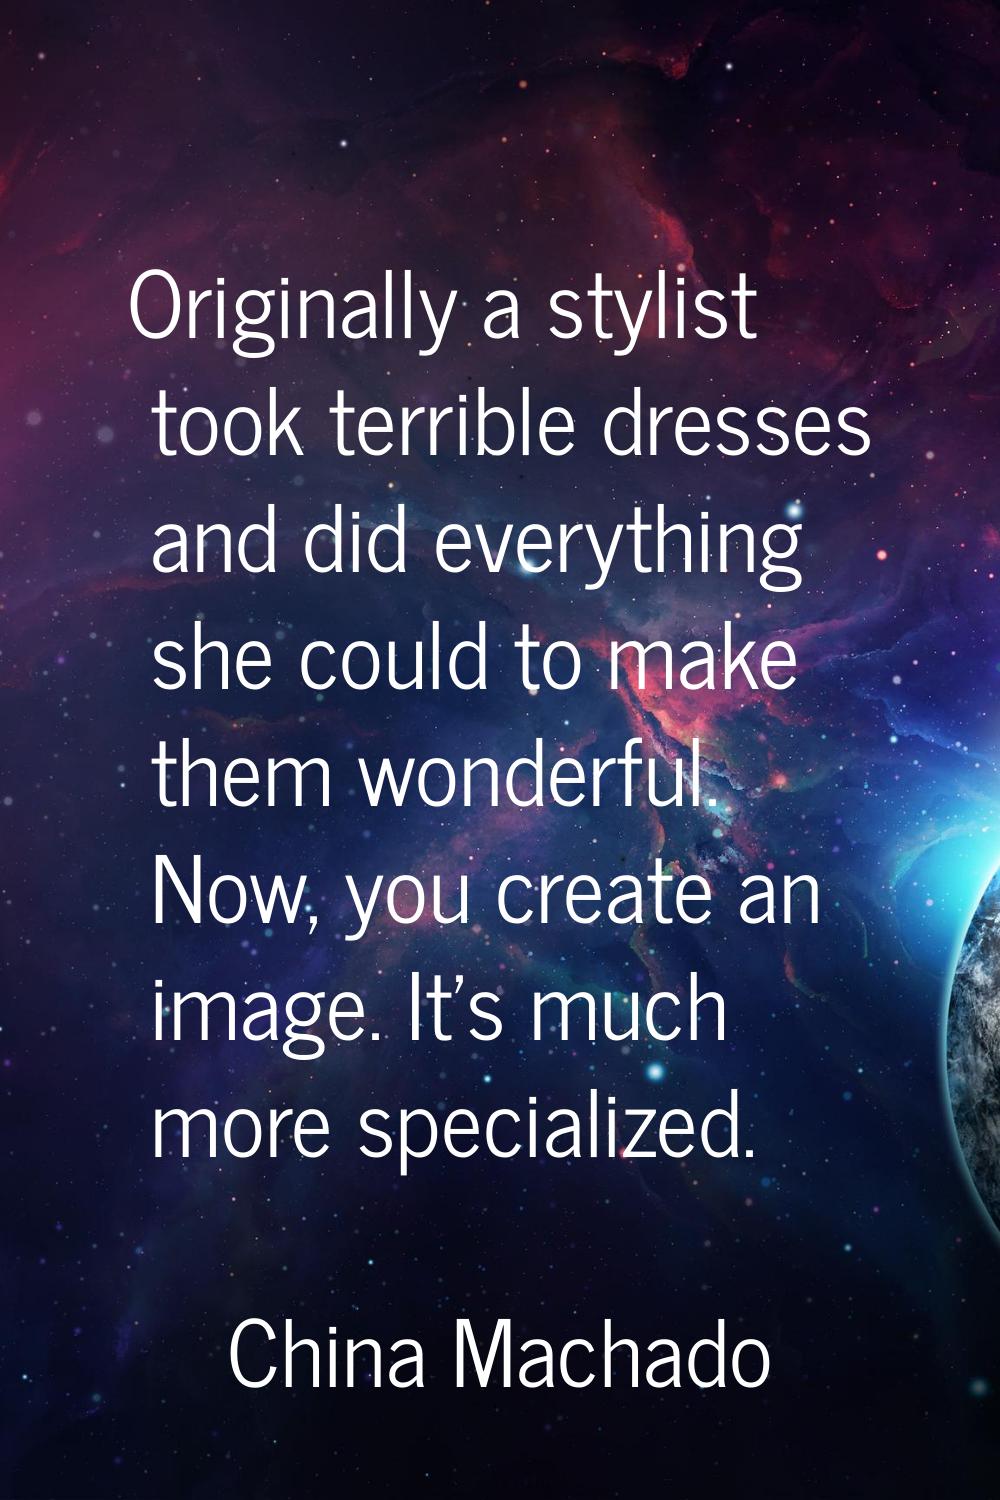 Originally a stylist took terrible dresses and did everything she could to make them wonderful. Now